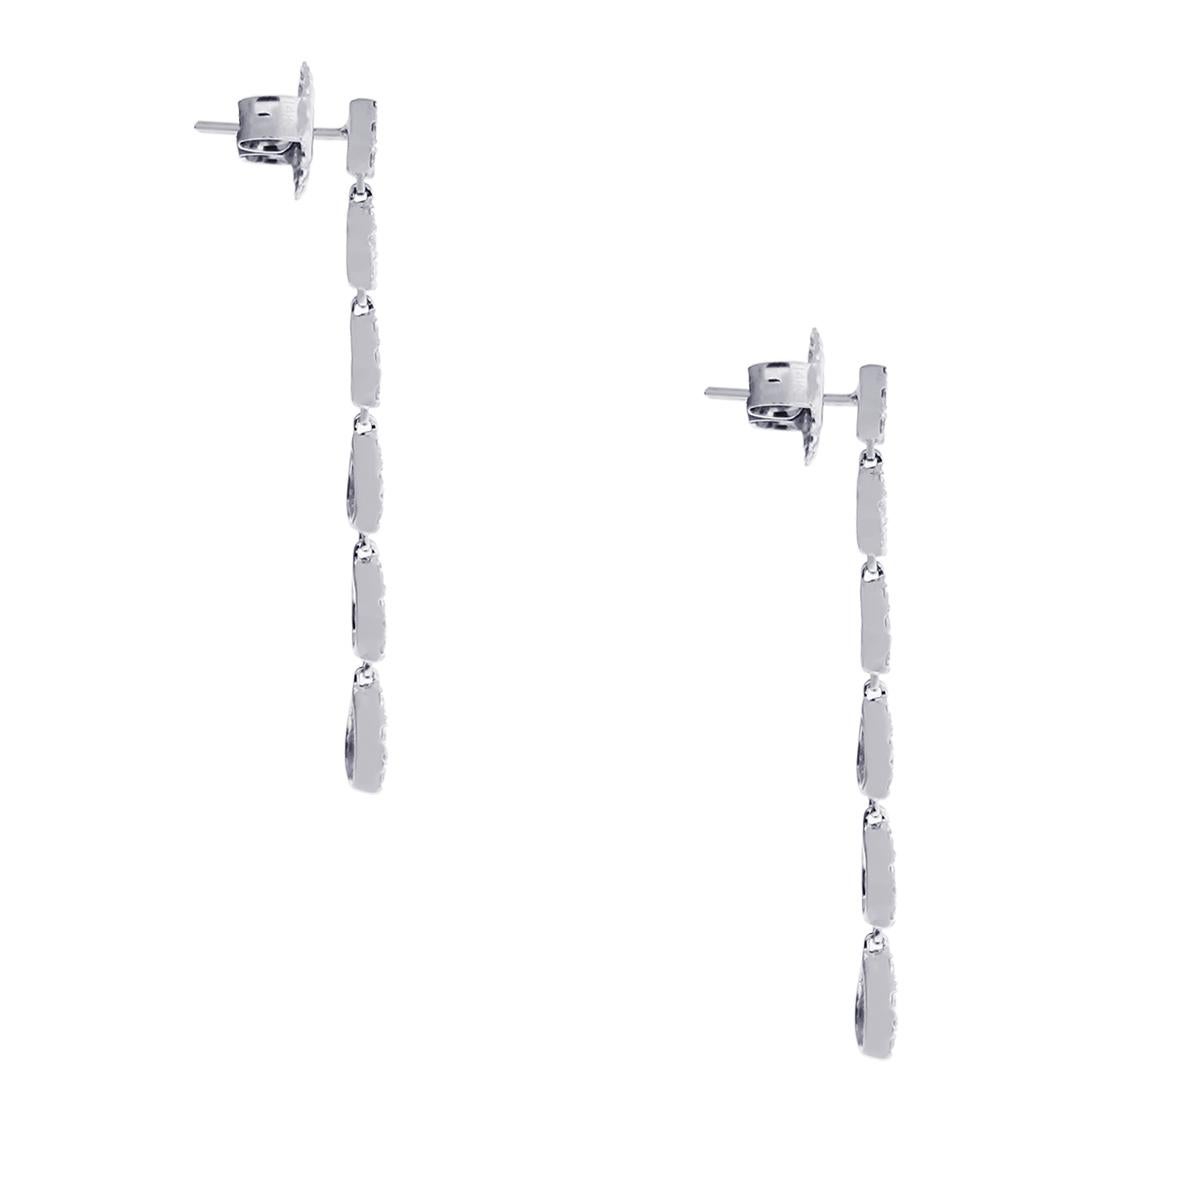 Material: 14k white gold
Diamond Details: Approximately 1.45 round brilliant cut diamonds. Diamonds are F/G in color and VS in clarity.
Earring Measurements: 0.15″ x 0.06″ x 1.50″
Earrings Backs: Post Friction
Total Weight: 3.1g (2.0dwt)
SKU: